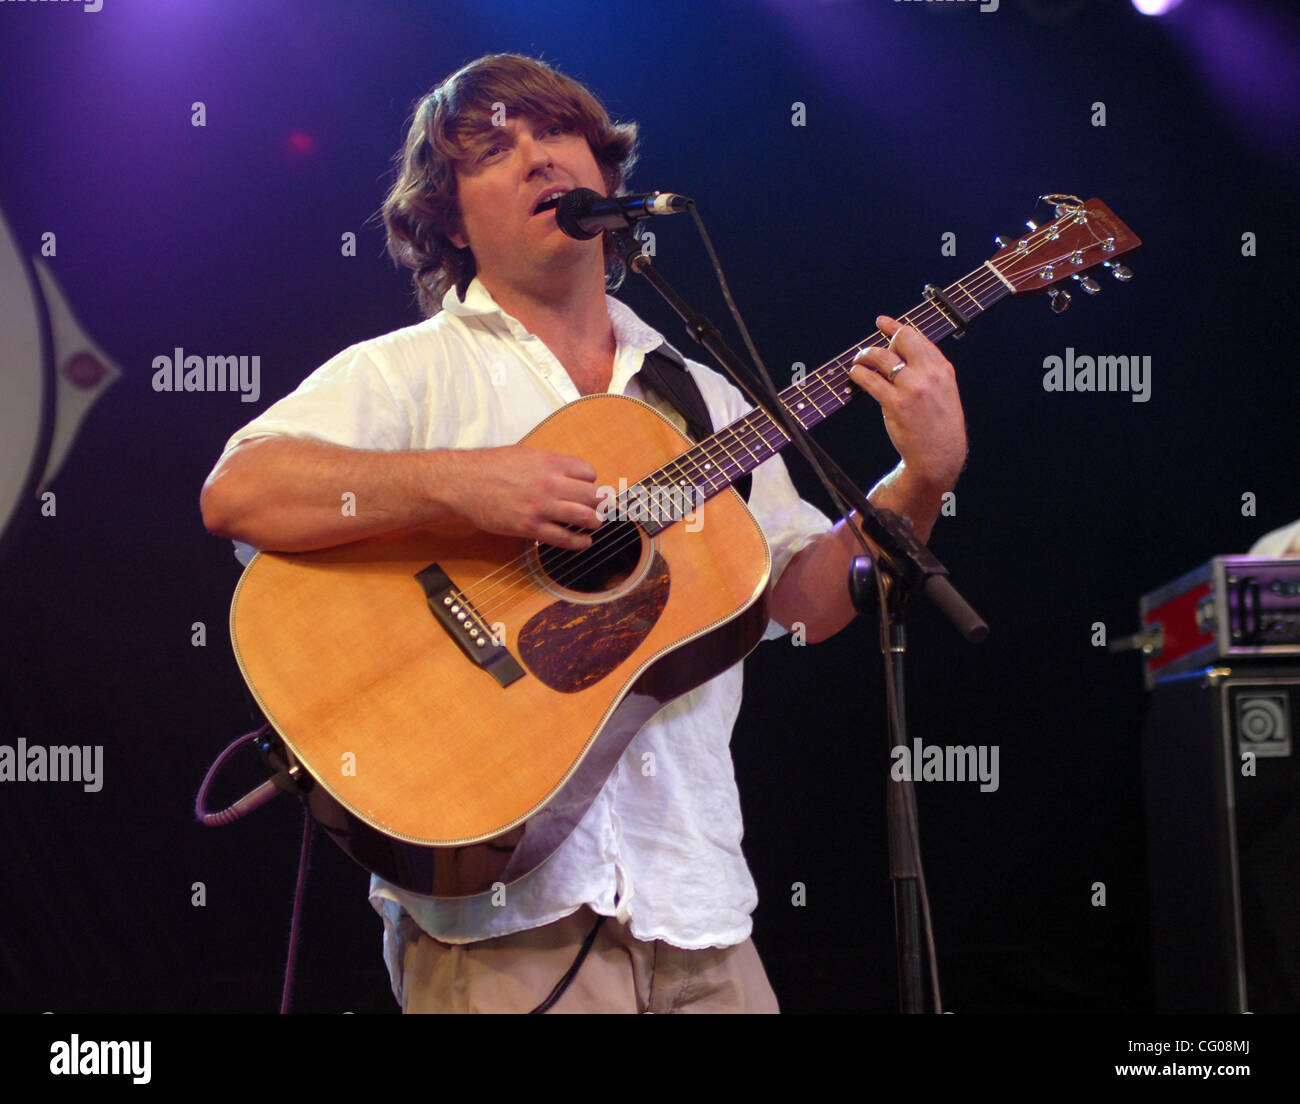 Jun 16, 2007 Manchester, TN; USA, Musician KELLER WILLIAMS performs live as part of the 2007 Bonnaroo Music and Arts Festival that took place in Manchester. Copyright 2007 Jason Moore. Mandatory Credit: Jason Moore Stock Photo